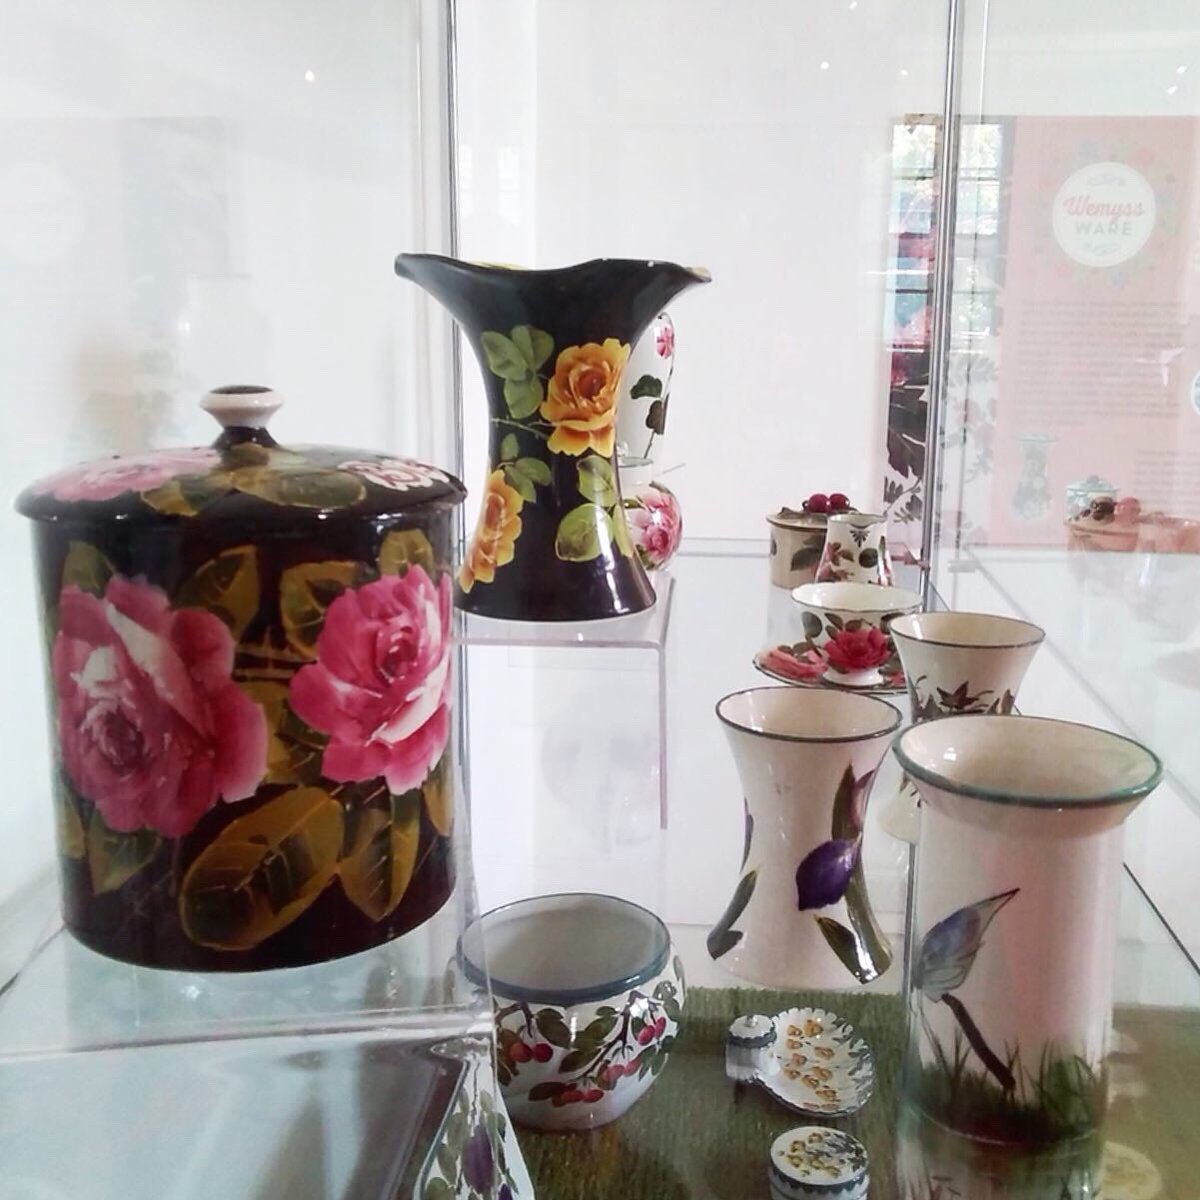 Here are some of the more grown up exhibits in the gallery - a wonderful selection of Wemyss Ware.

#bloomingmarvellous #standrewsmuseum #wemyssware #standrews #freeadmission #visitfife #visitscotland #visitstandrews #fife #onfife #localhistory #localpottery #ceramics #tablewere